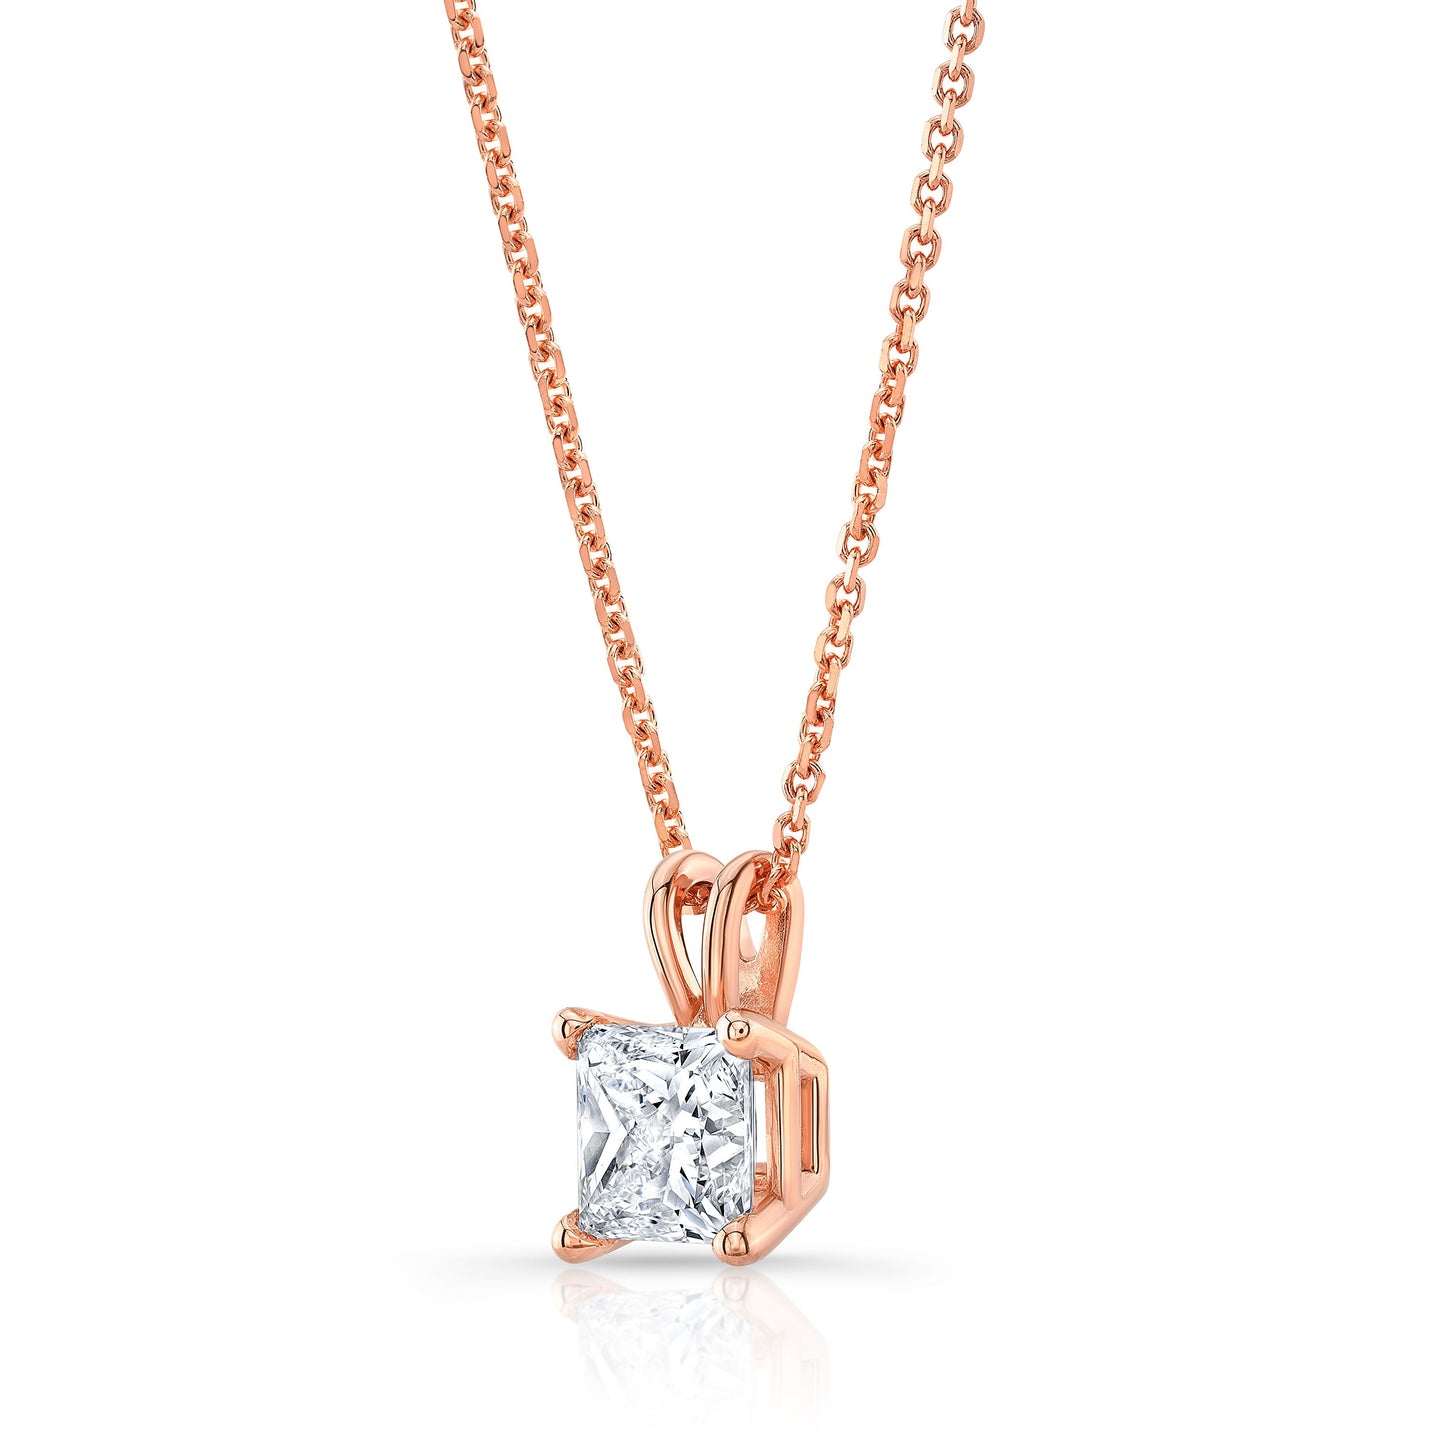 Princess Diamond Solitaire Pendant In A 14k Rose Gold 4-prong Basket Setting, 3ct. T.w. (hi, Si1-si2)